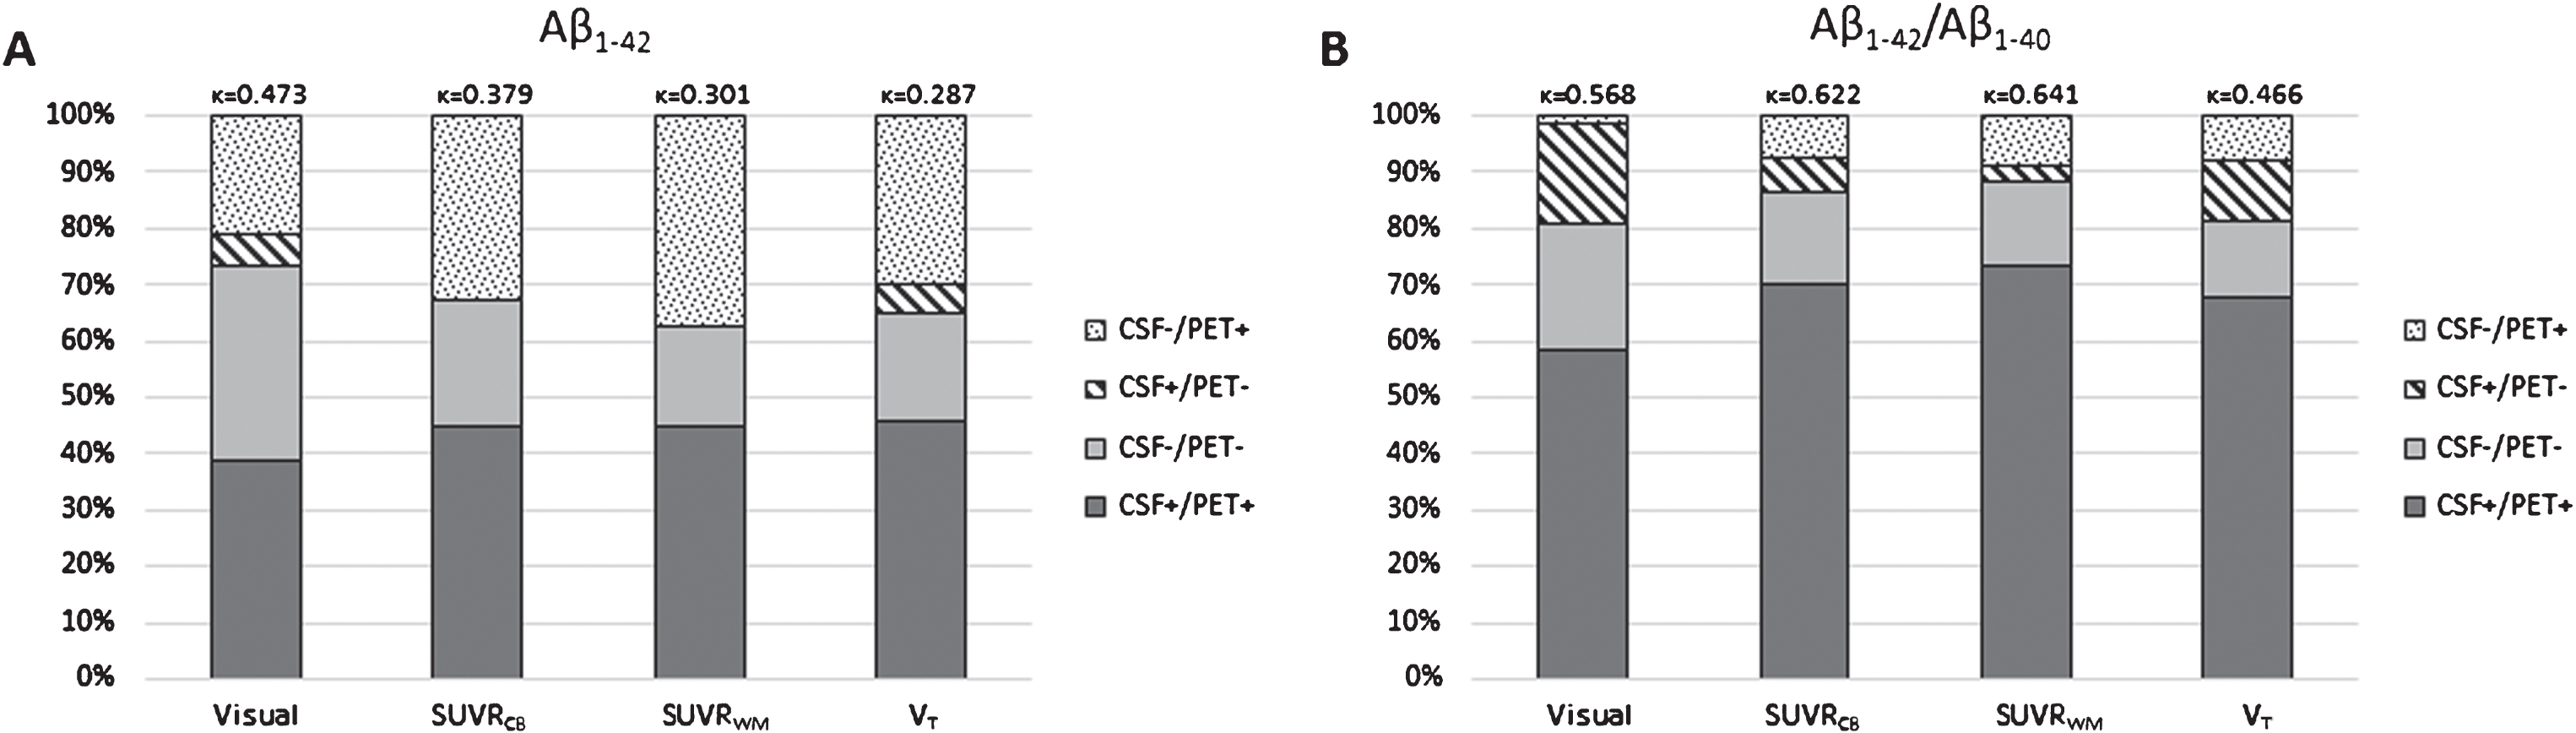 Concordance and discordance between amyloid markers. CSF Aβ1–42 and [18F]Florbetapir ([18F]AV45) PET (visual, SUVRCB, SUVRWM, and VT) (A) were compared to CSF Aβ1–42/Aβ1–40 and [18F]AV45 PET (same measurements as described for A) (B). Concordance increased for all four [18F]AV45 PET measurements when considering the CSF ratio. Especially, discordant CSF negative subjects became concordant CSF positive. Aβ, amyloid-β; [18F]AV45, [18F]Florbetapir; CB, cerebellar grey matter; CSF, cerebrospinal fluid; SUVR, standardized uptake value ratio; VT, total volume of distribution; WM, whole subcortical white matter.